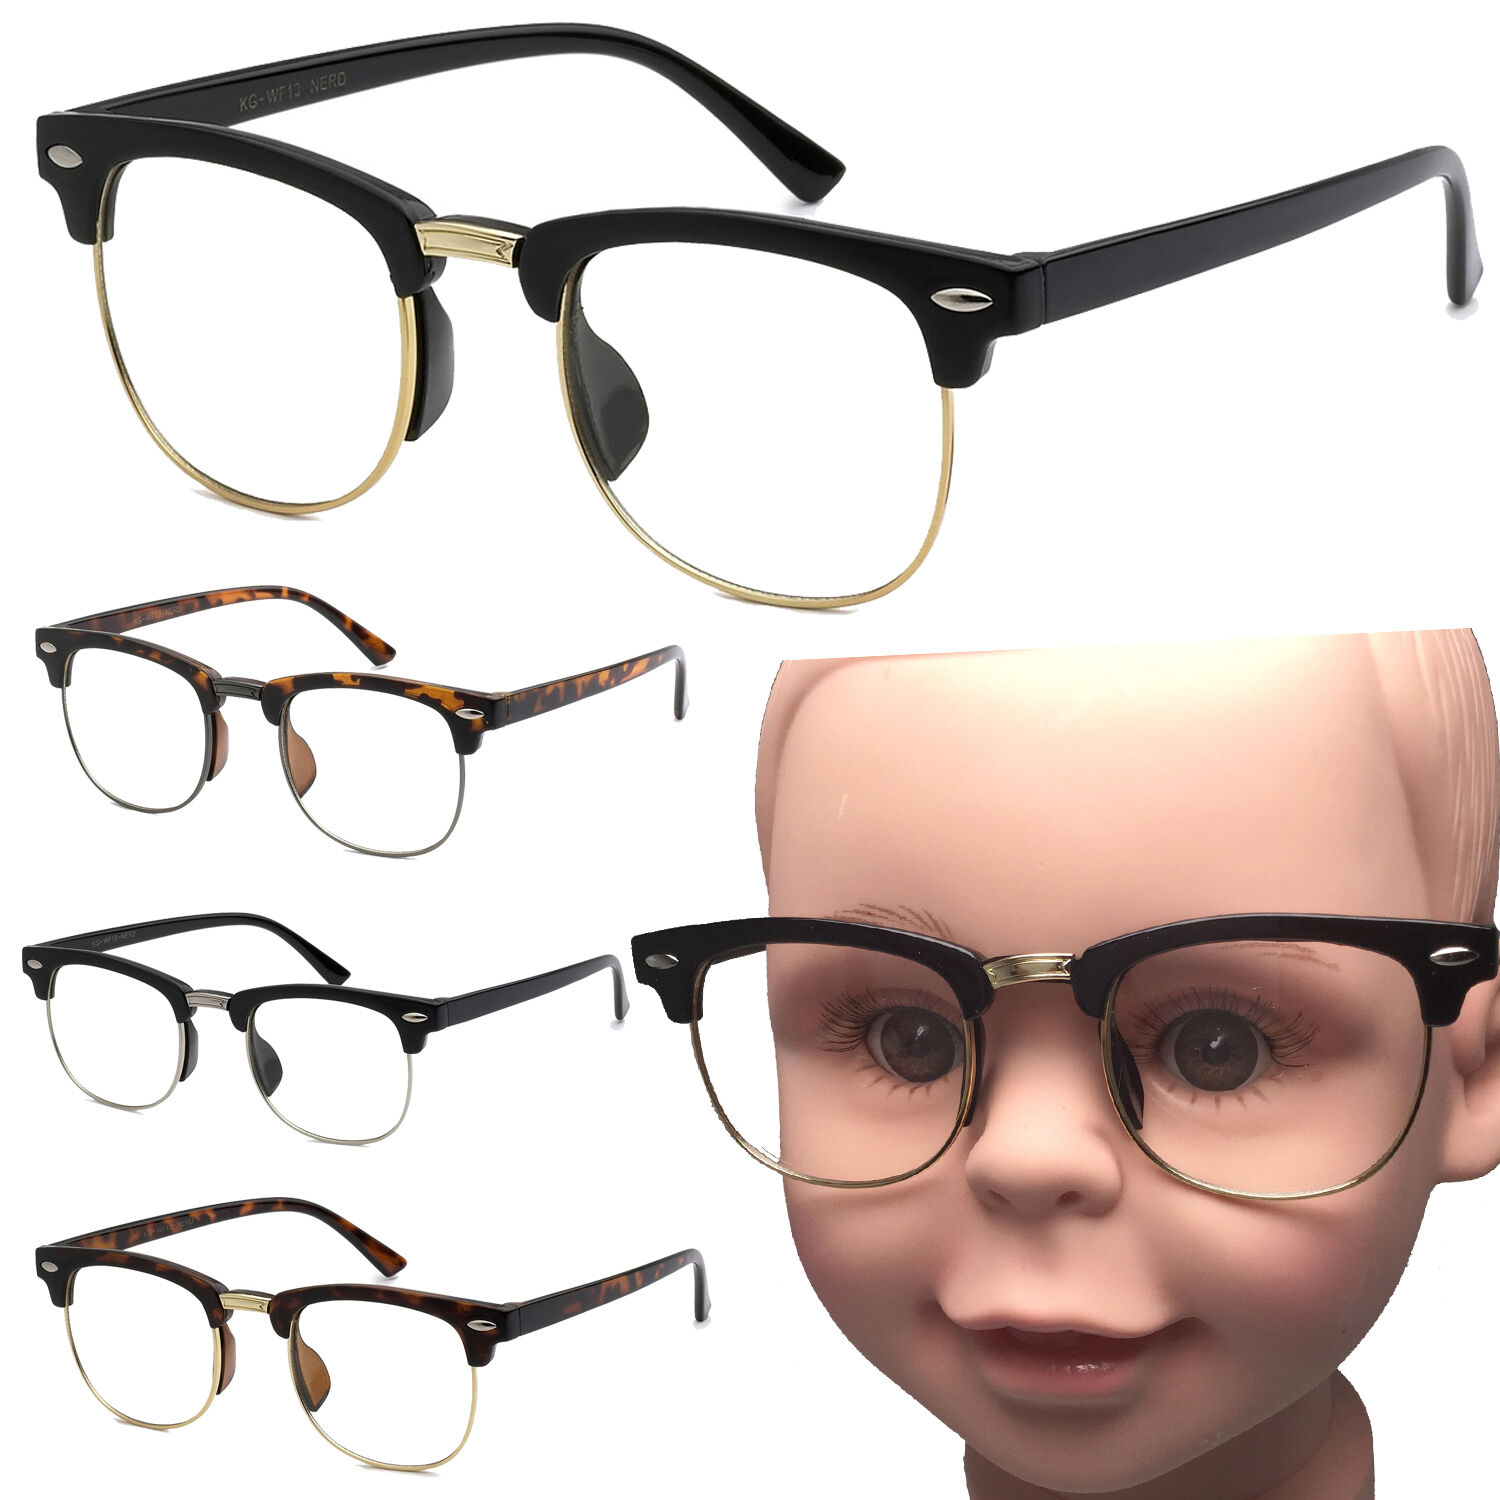 Small Kid Size Clear Lens Glasses Half Frame Nerd Hipster Child Costume Age 3+